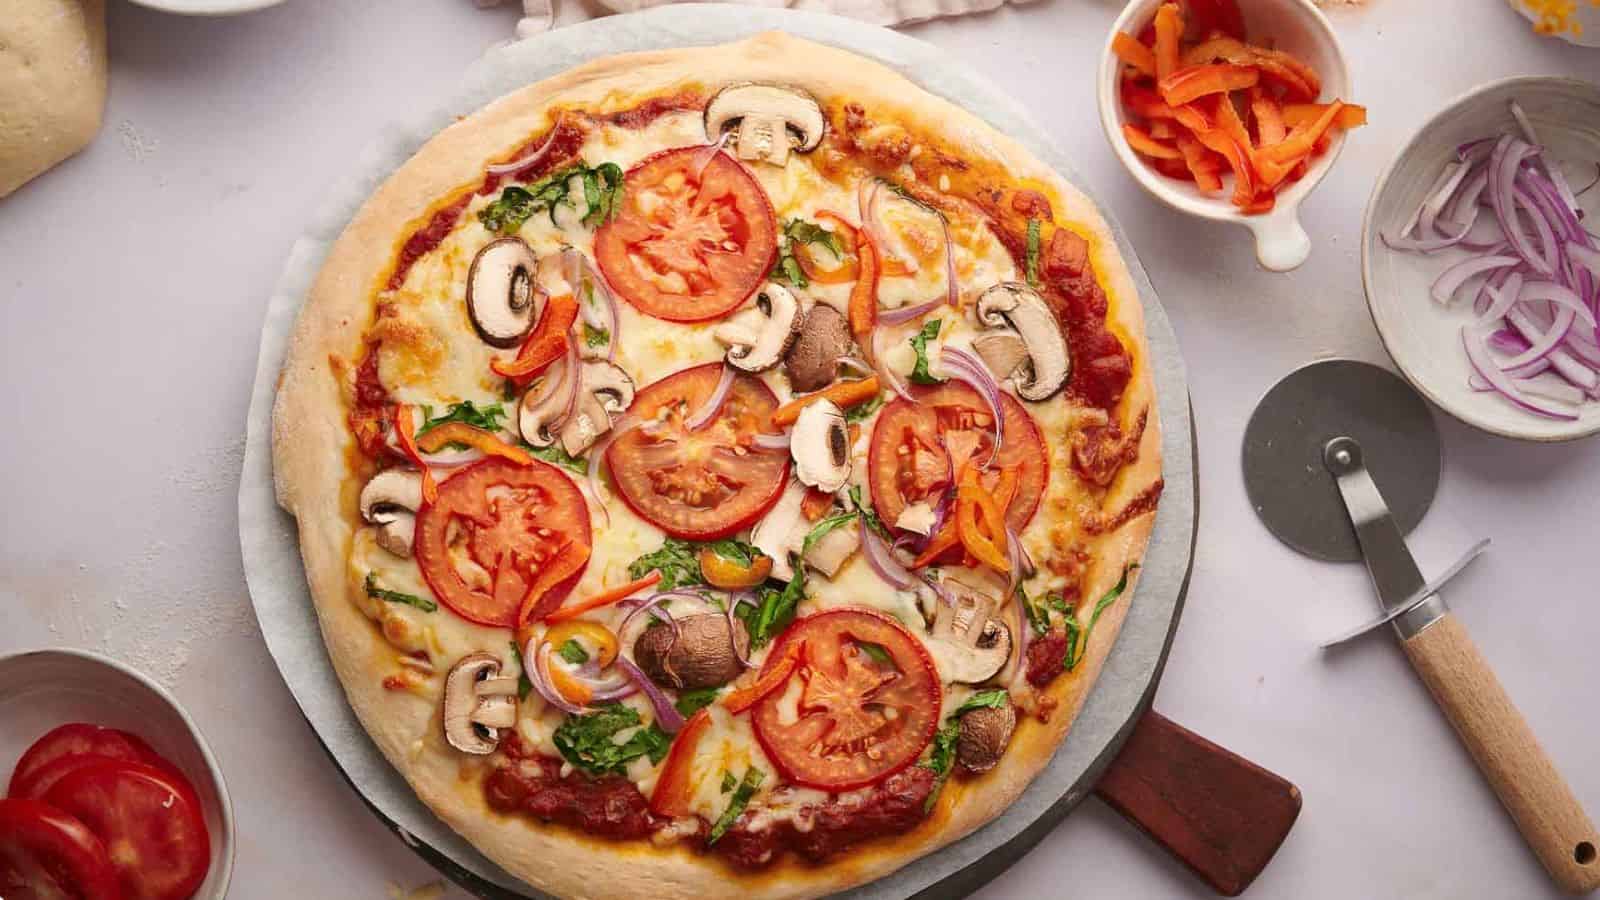 A pizza with tomatoes, onions and mushrooms on a plate.